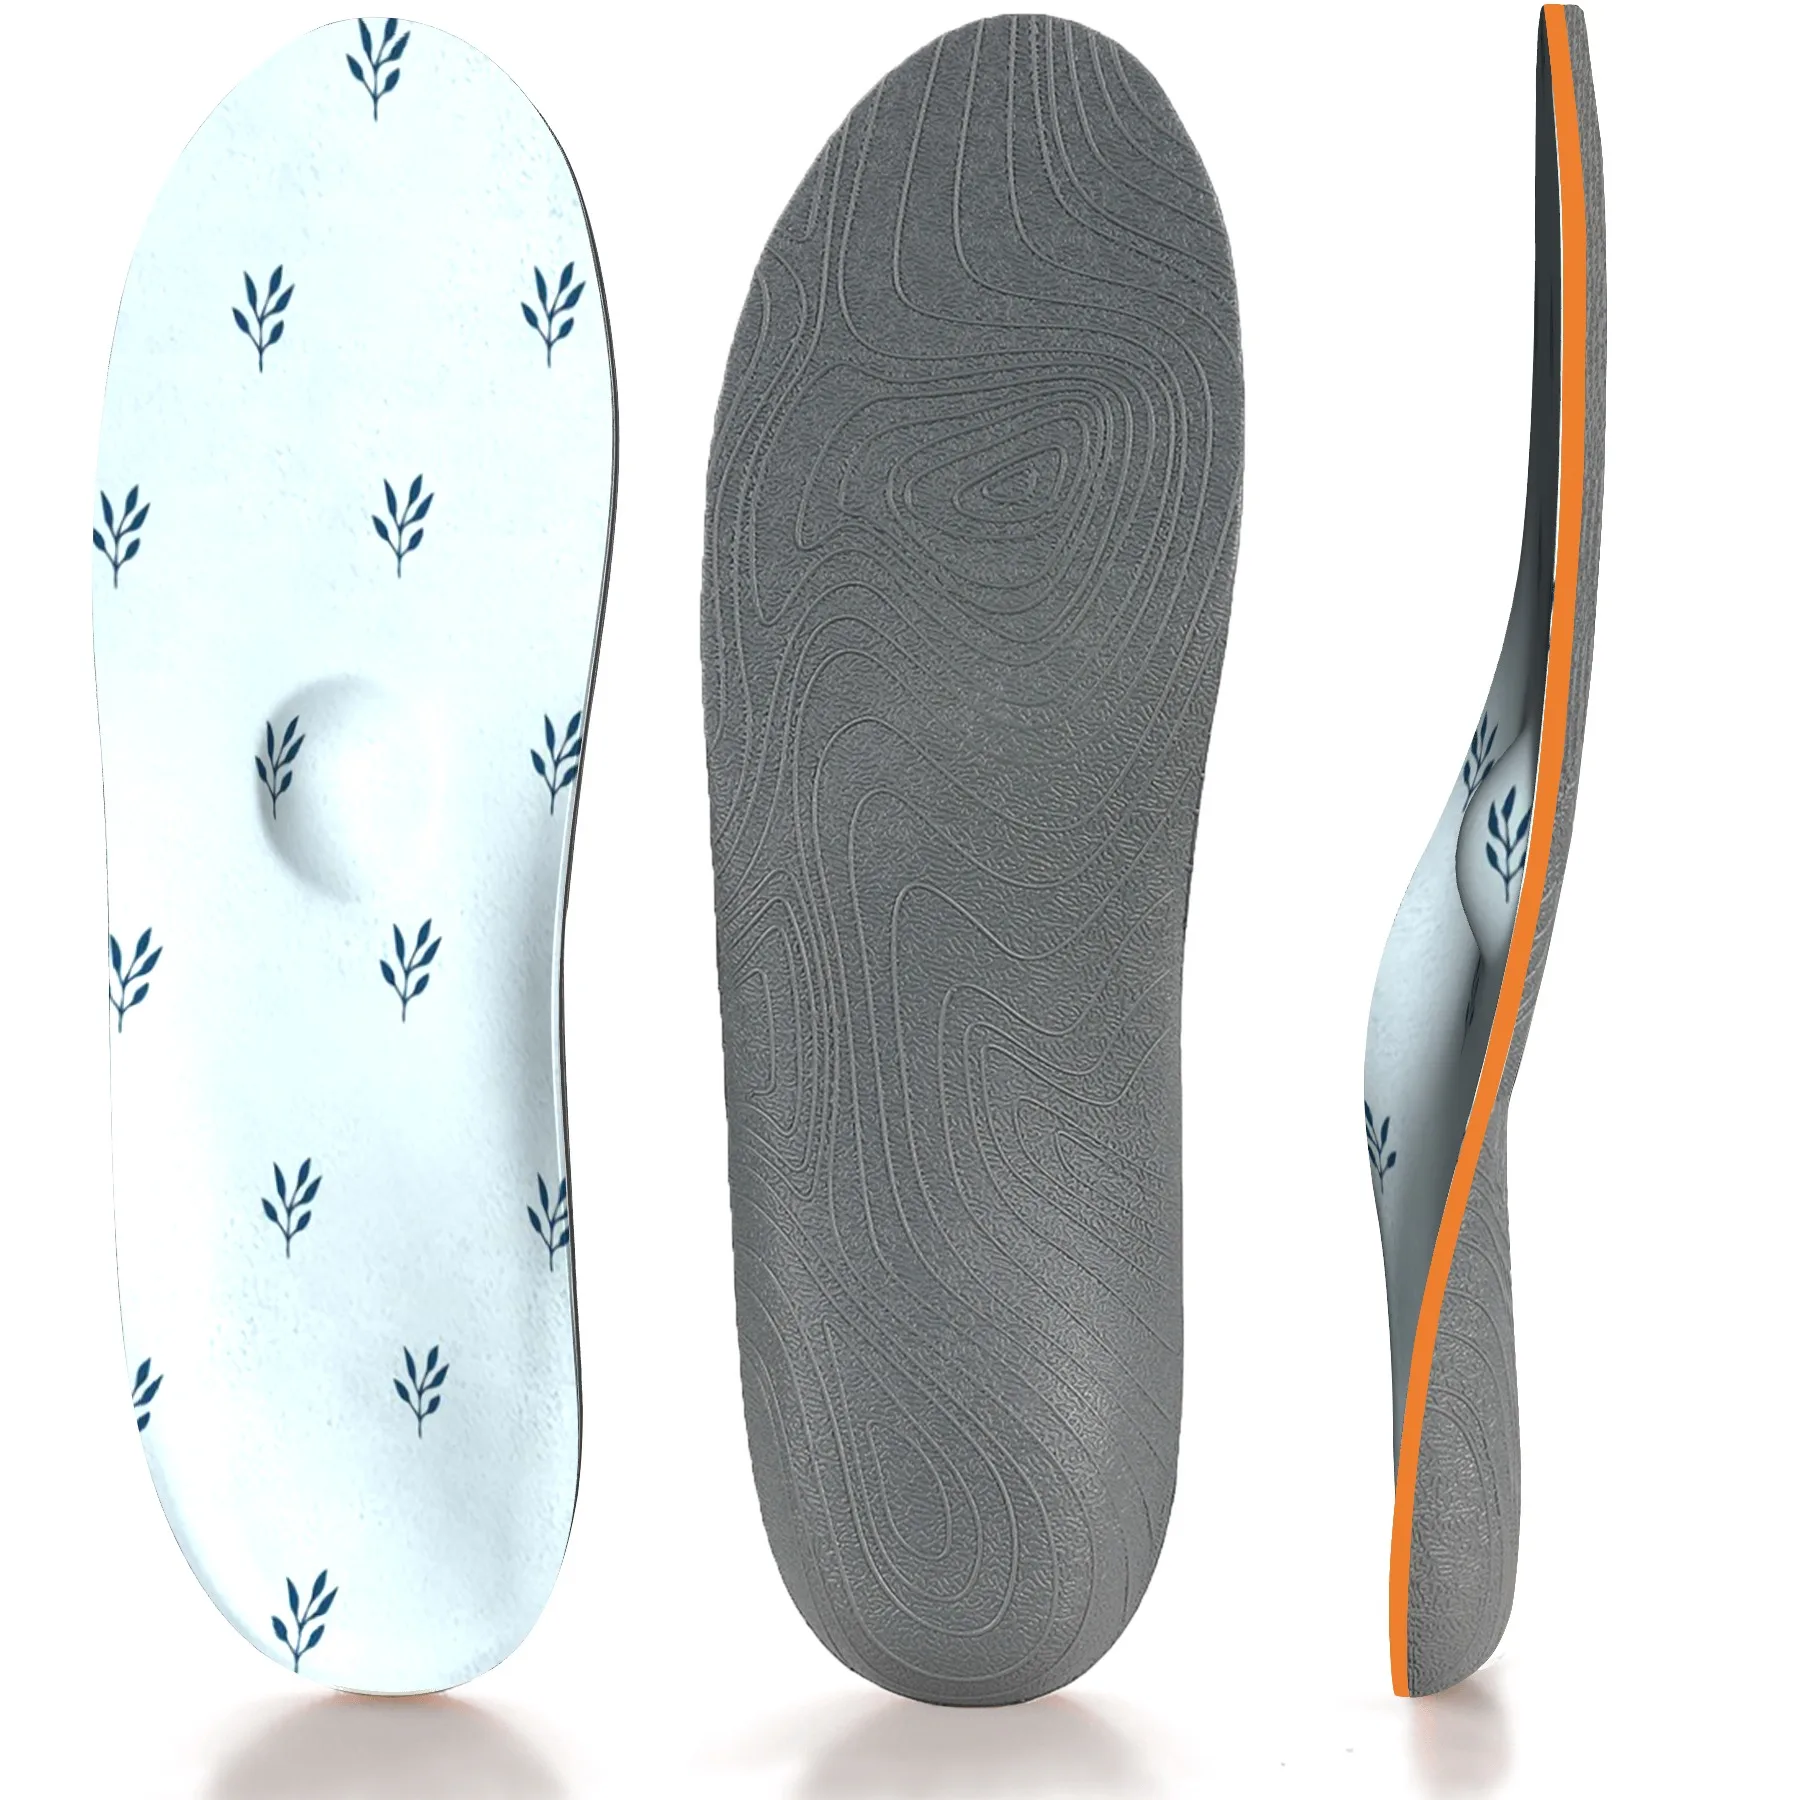 IFITNA Foot protection insole Male And Female Promote foot blood circulation Long station Worth buying insoles